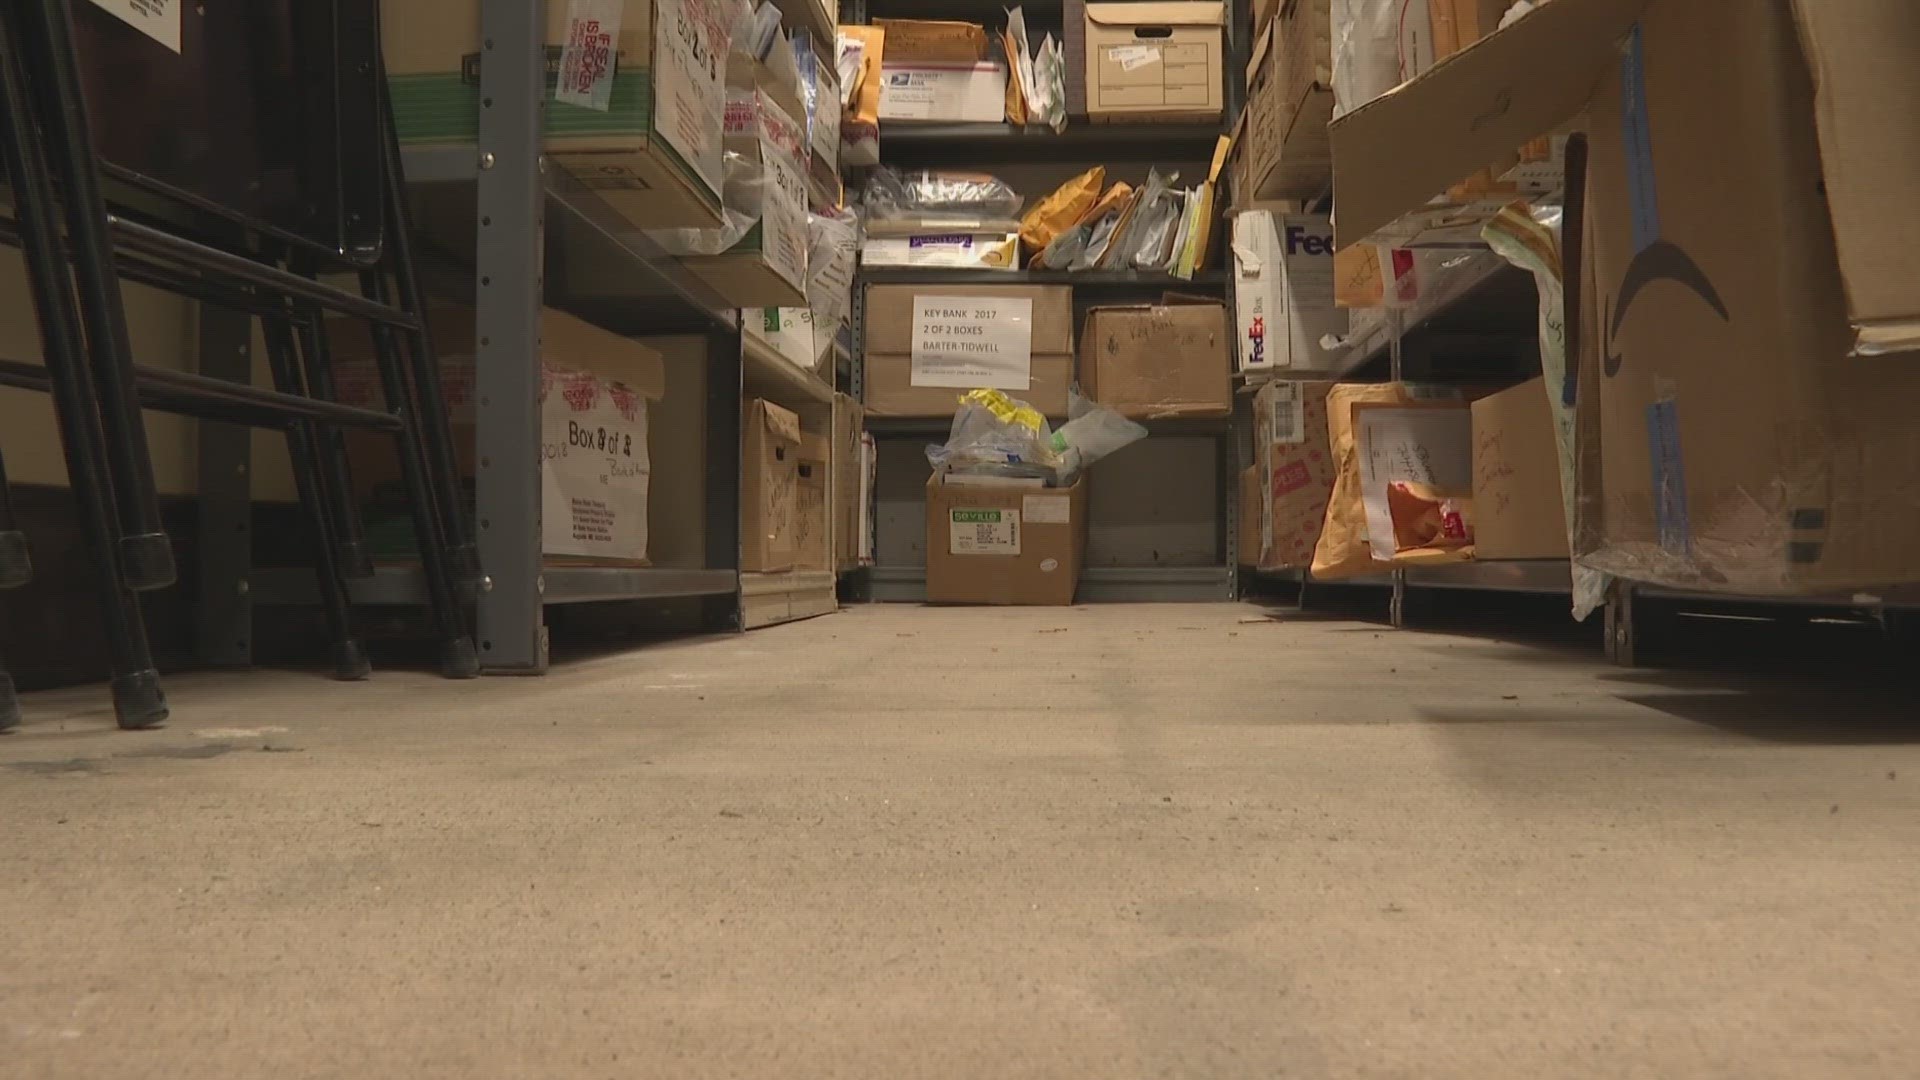 The Maine state treasurer's office claims to hold $310,000,000 worth of unclaimed property in a now-full storage room.